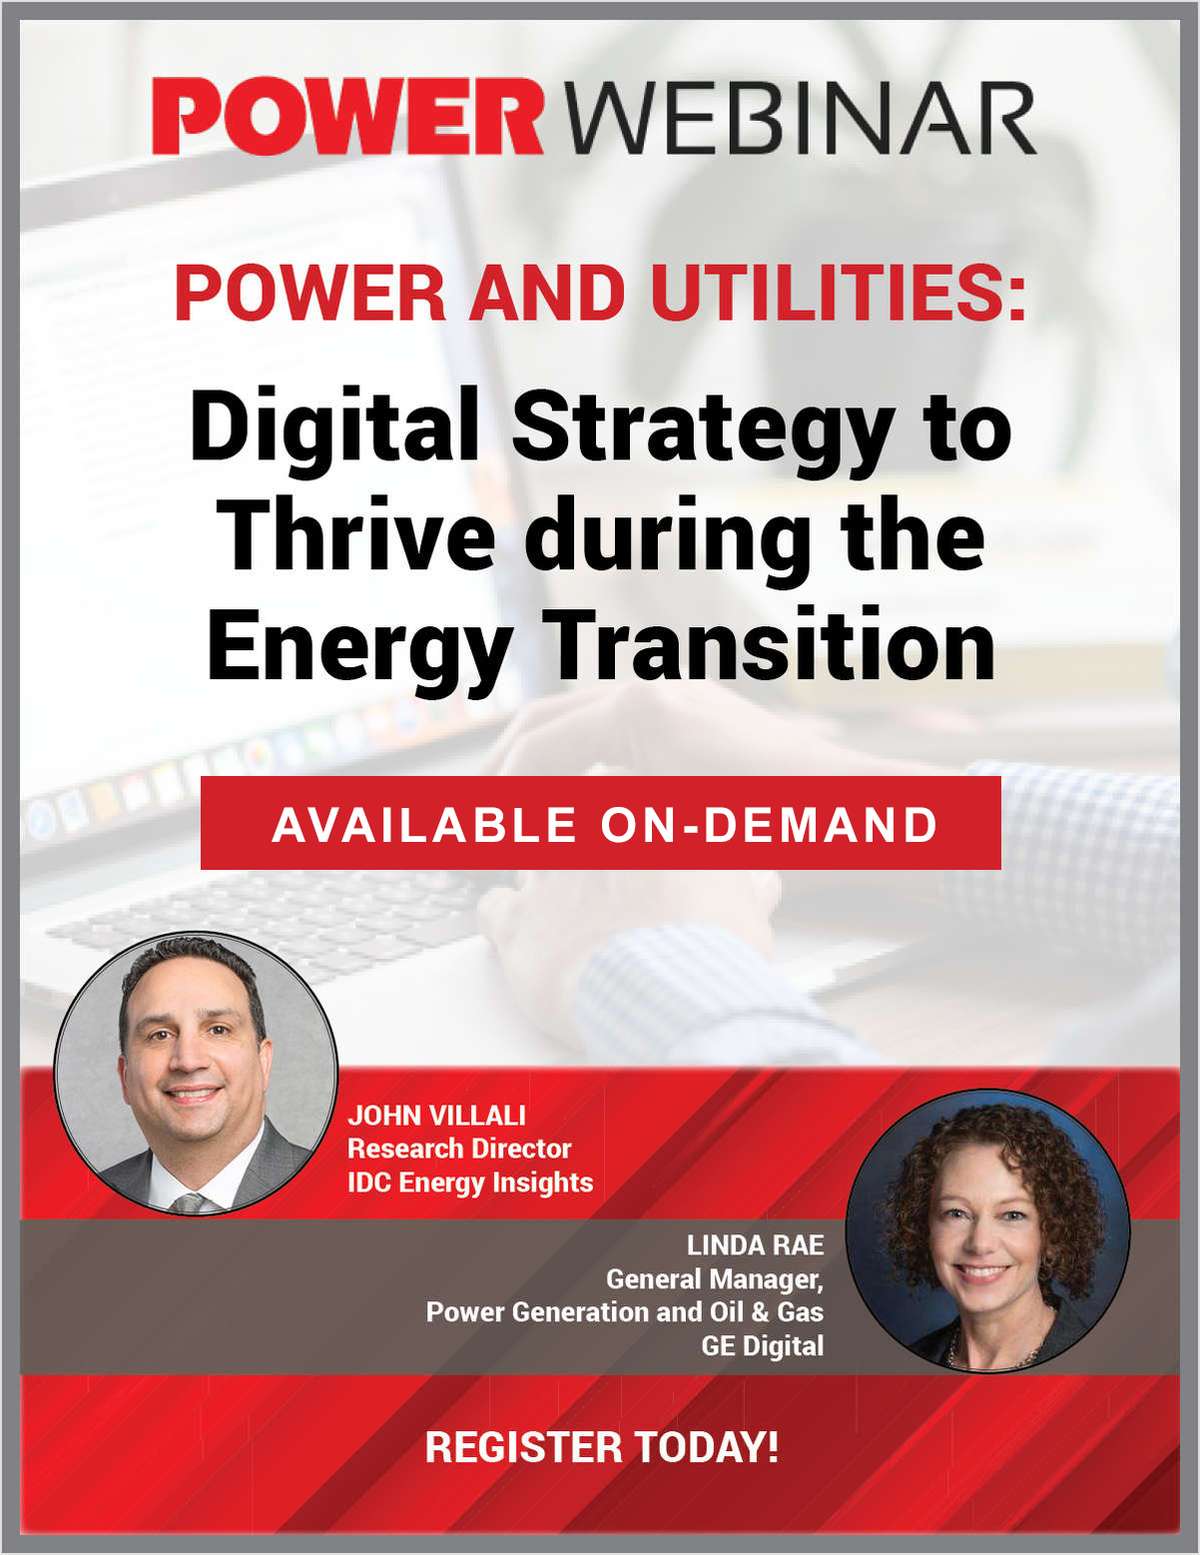 Power and Utilities: Digital Strategy to Thrive during the Energy Transition